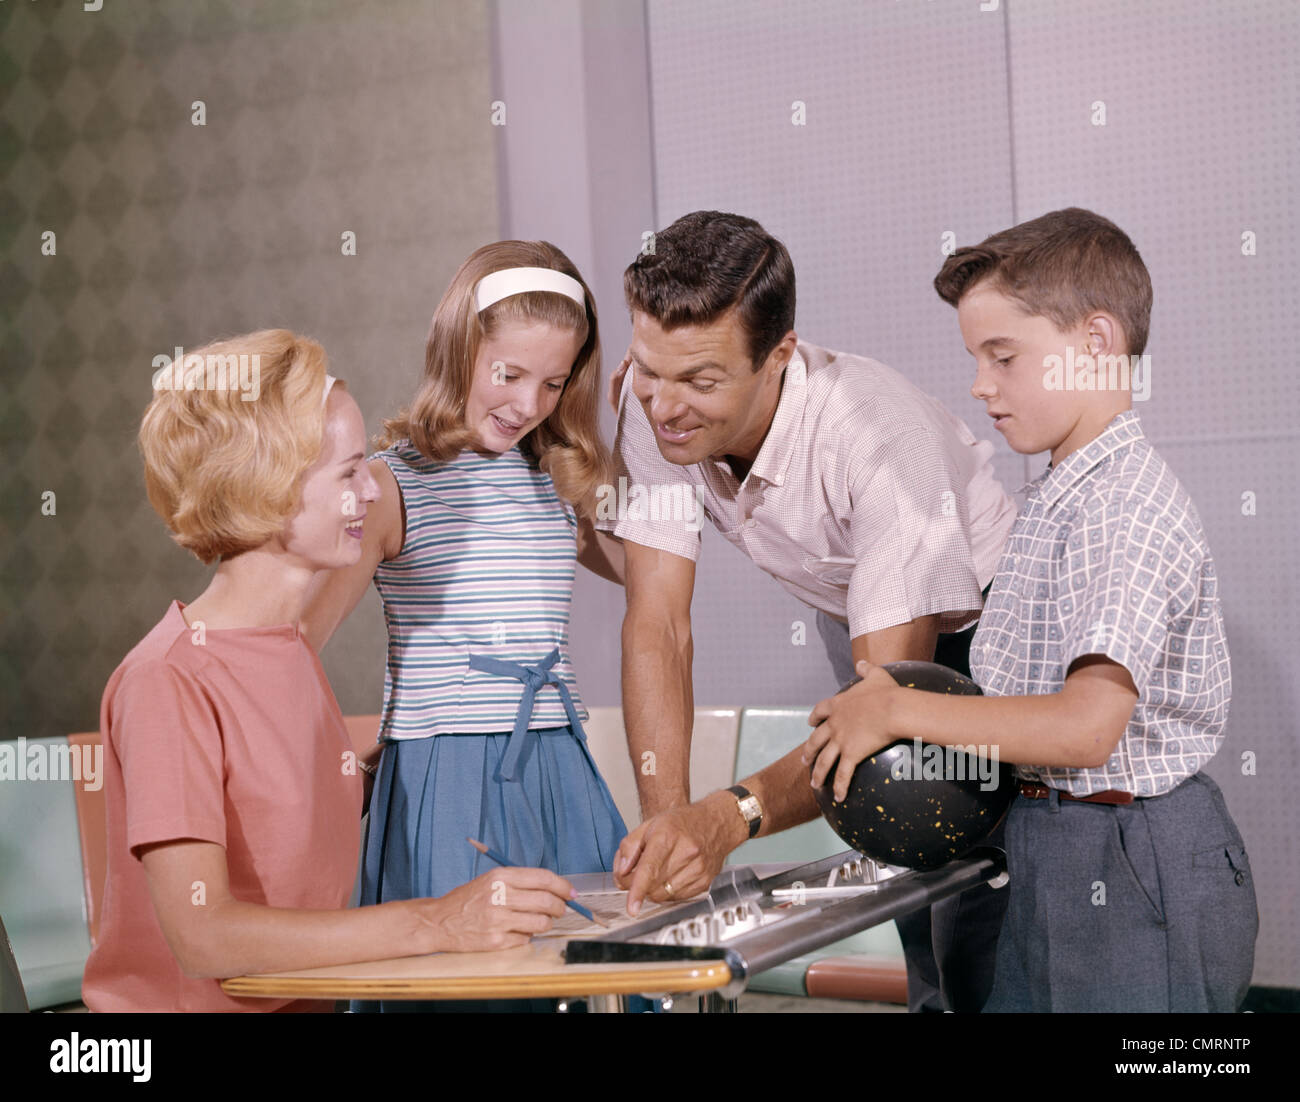 FAMILY MOTHER FATHER DAUGHTER SON TOGETHER BOWLING LOOKING AT SCORE INDOOR 1960s Stock Photo